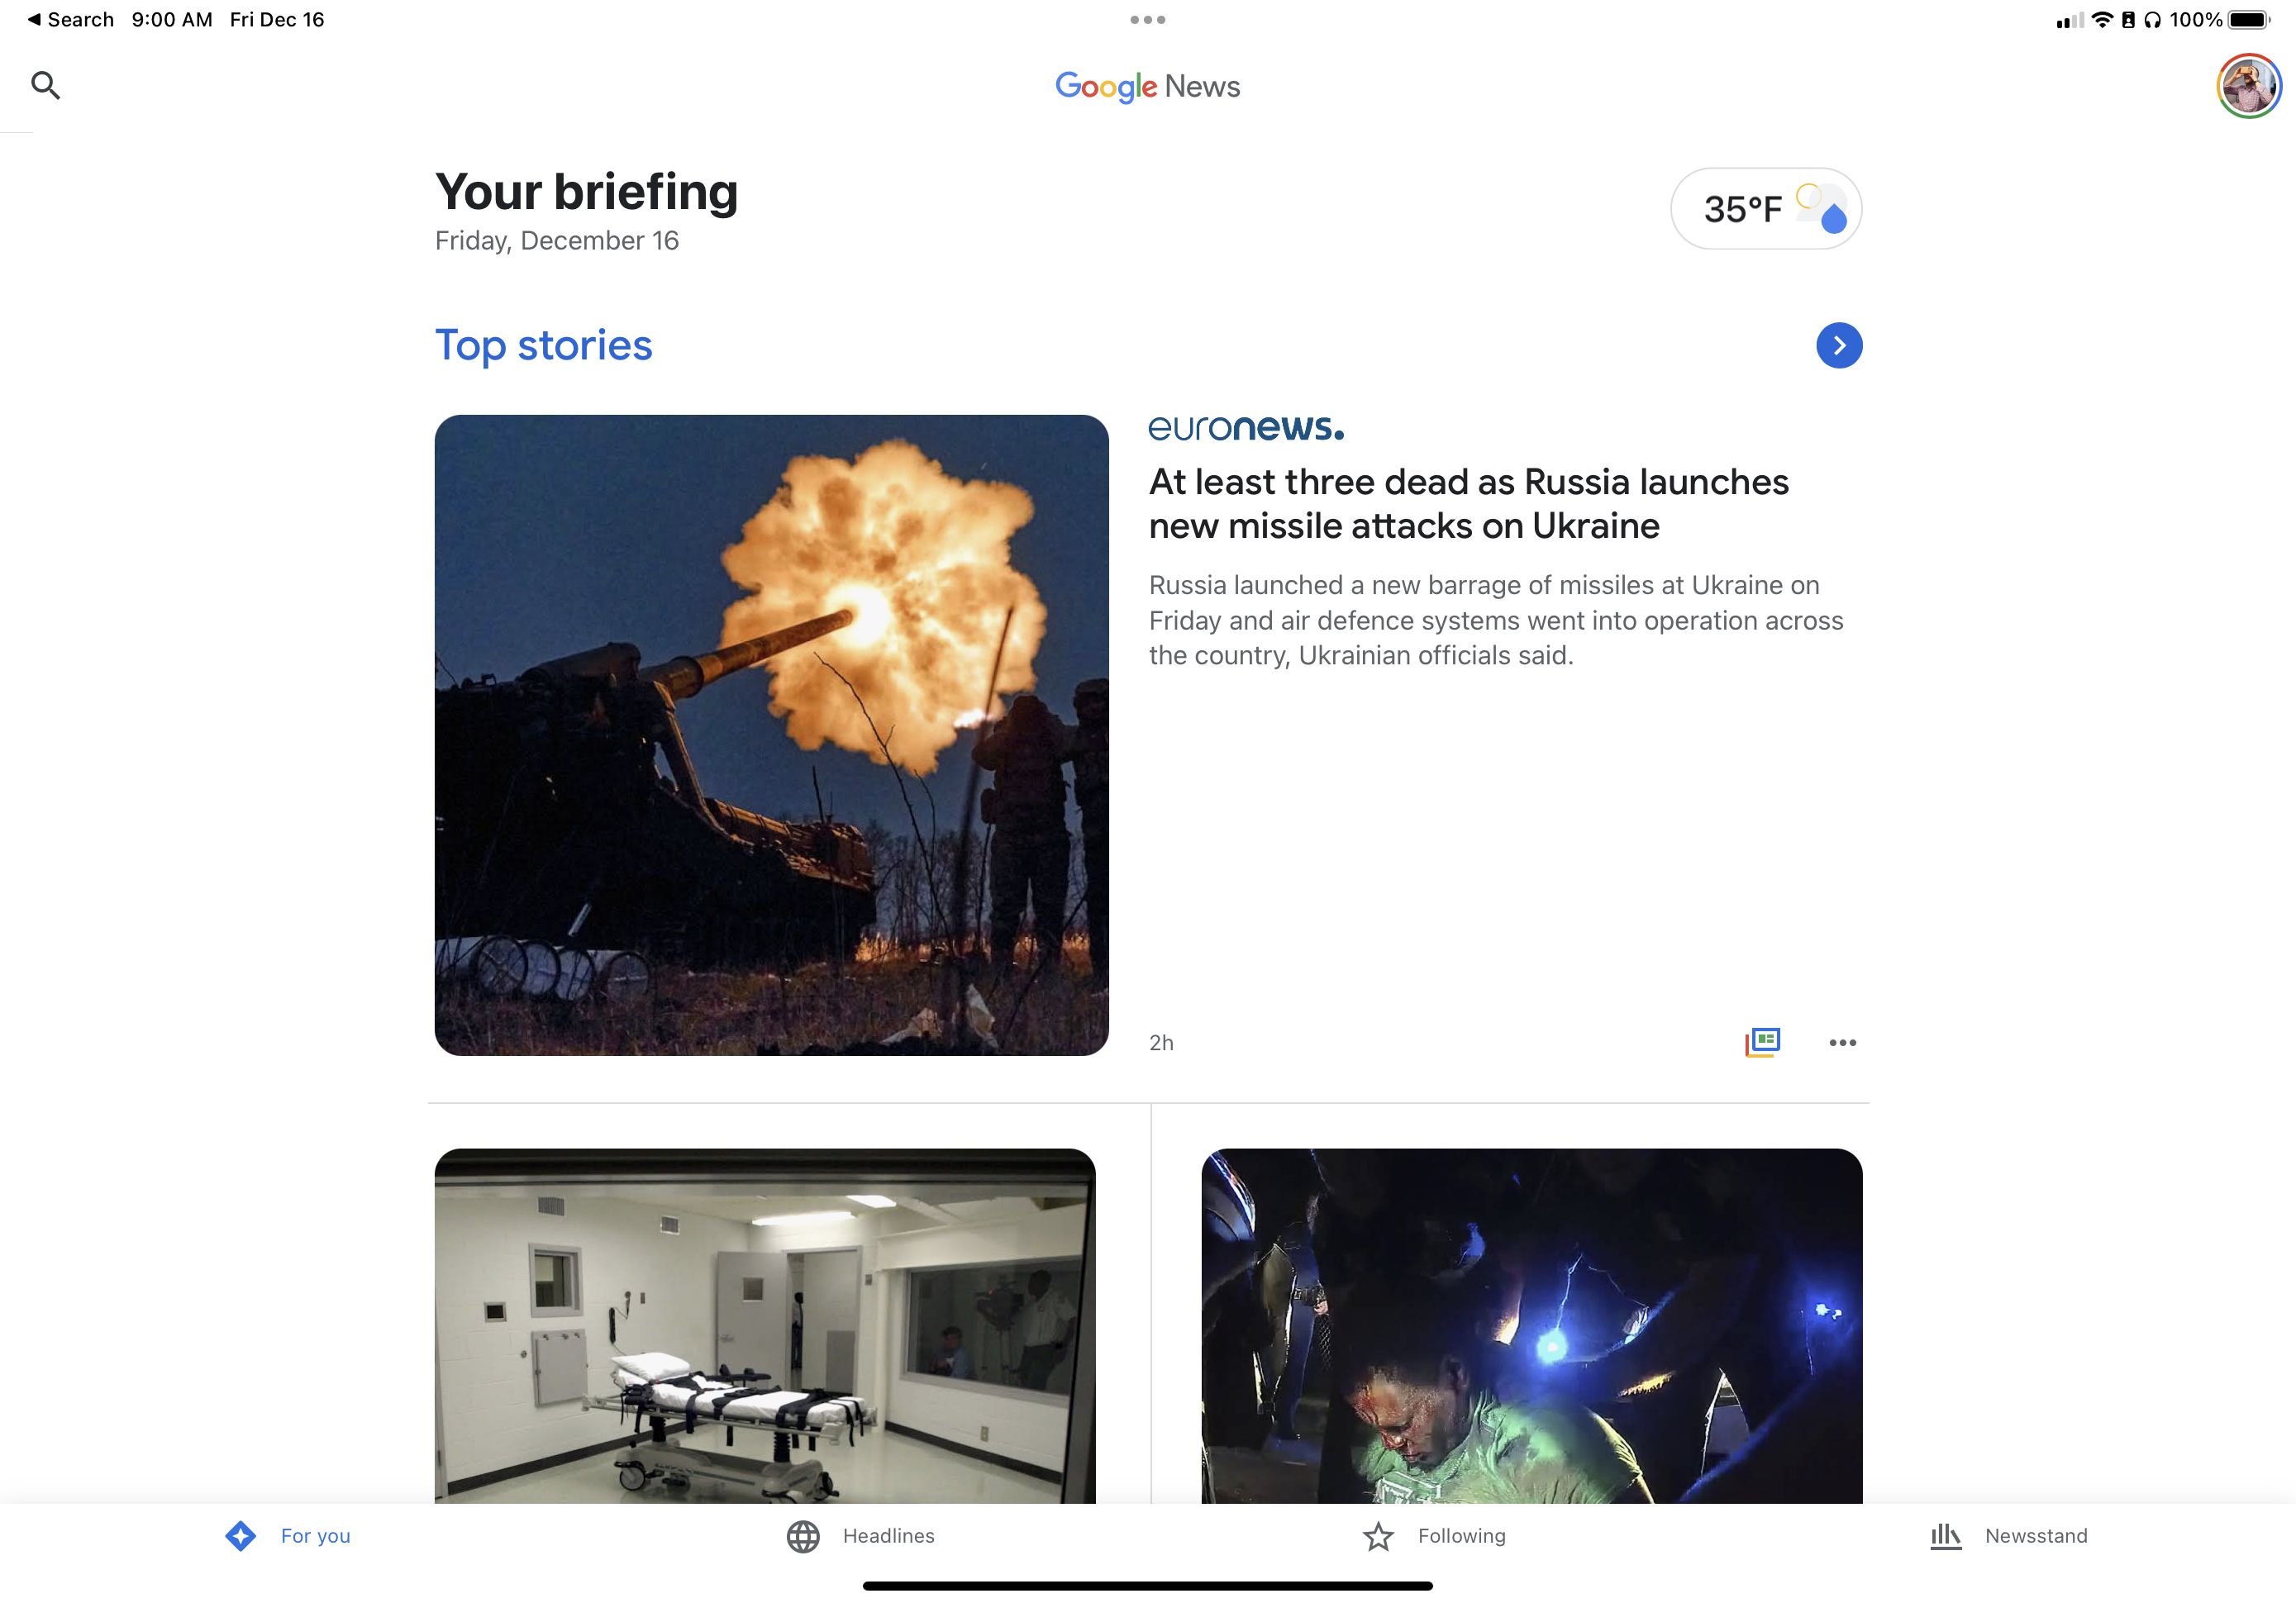 Google News is similar to Apple News but better suited for shorter blogs and local events.  It's also available in more locations.